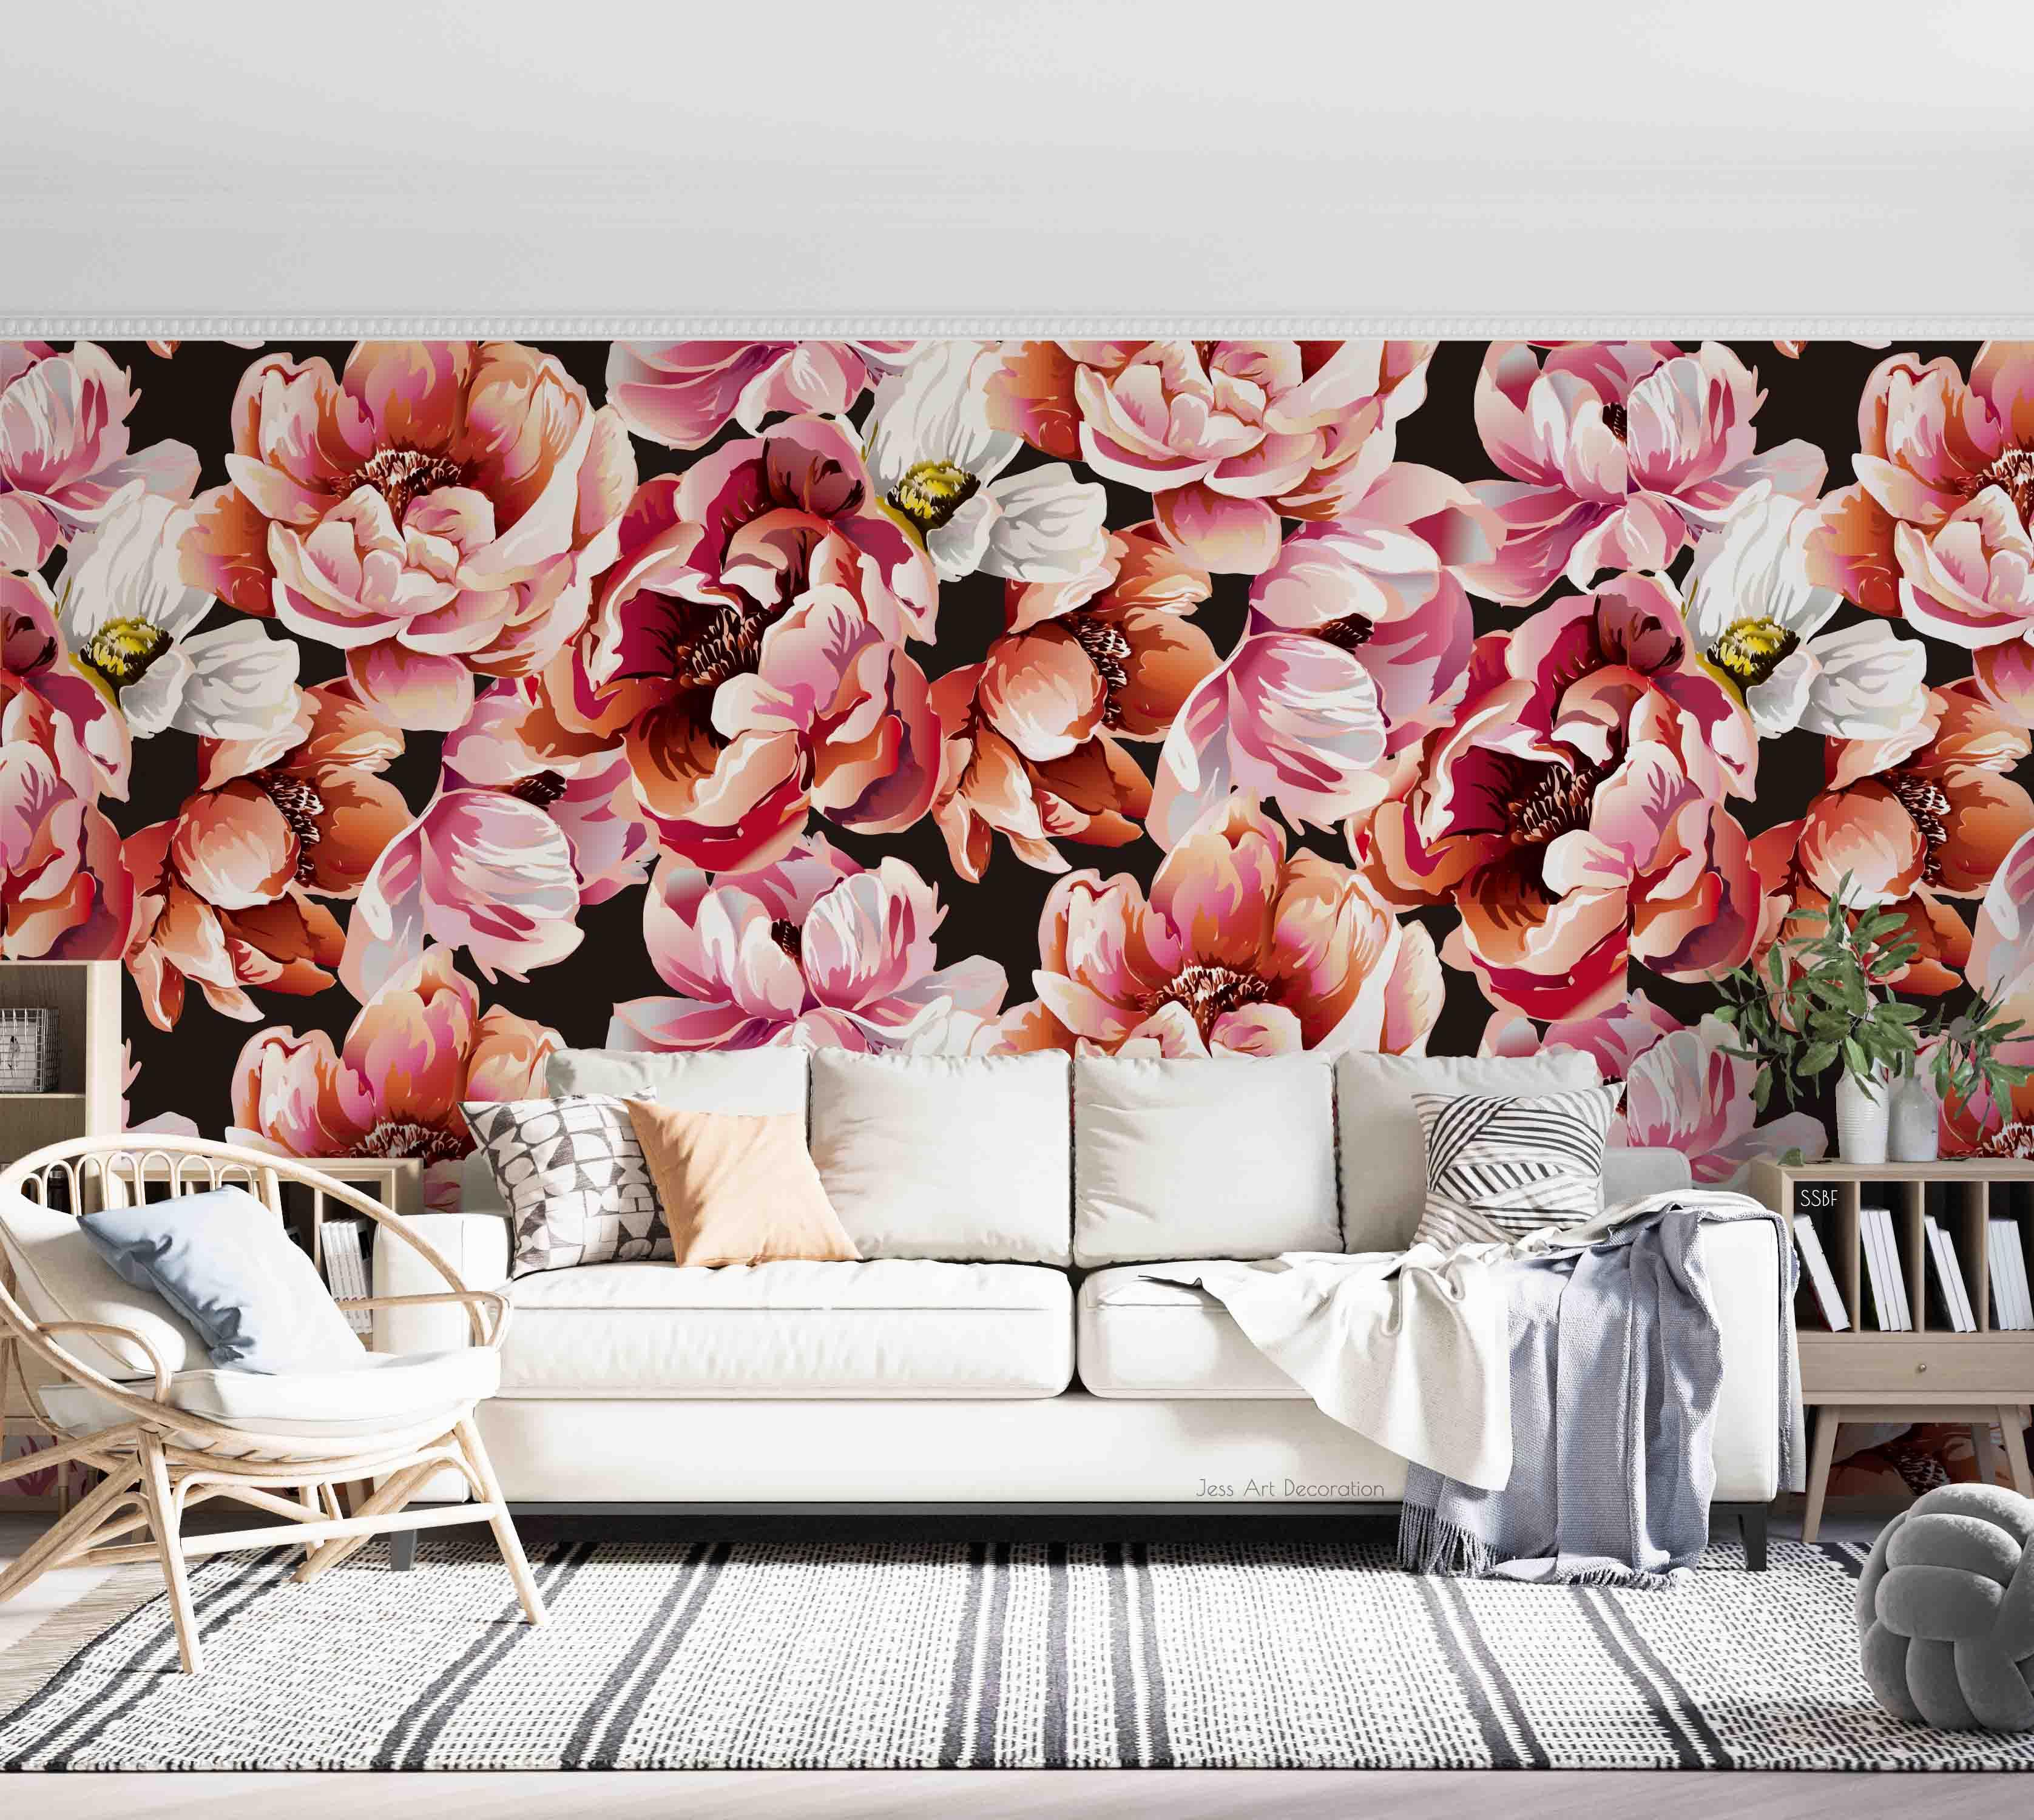 3D Vintage Baroque Art Blooming Pink Peony Watercolor Wall Mural Wallpaper GD 3569- Jess Art Decoration